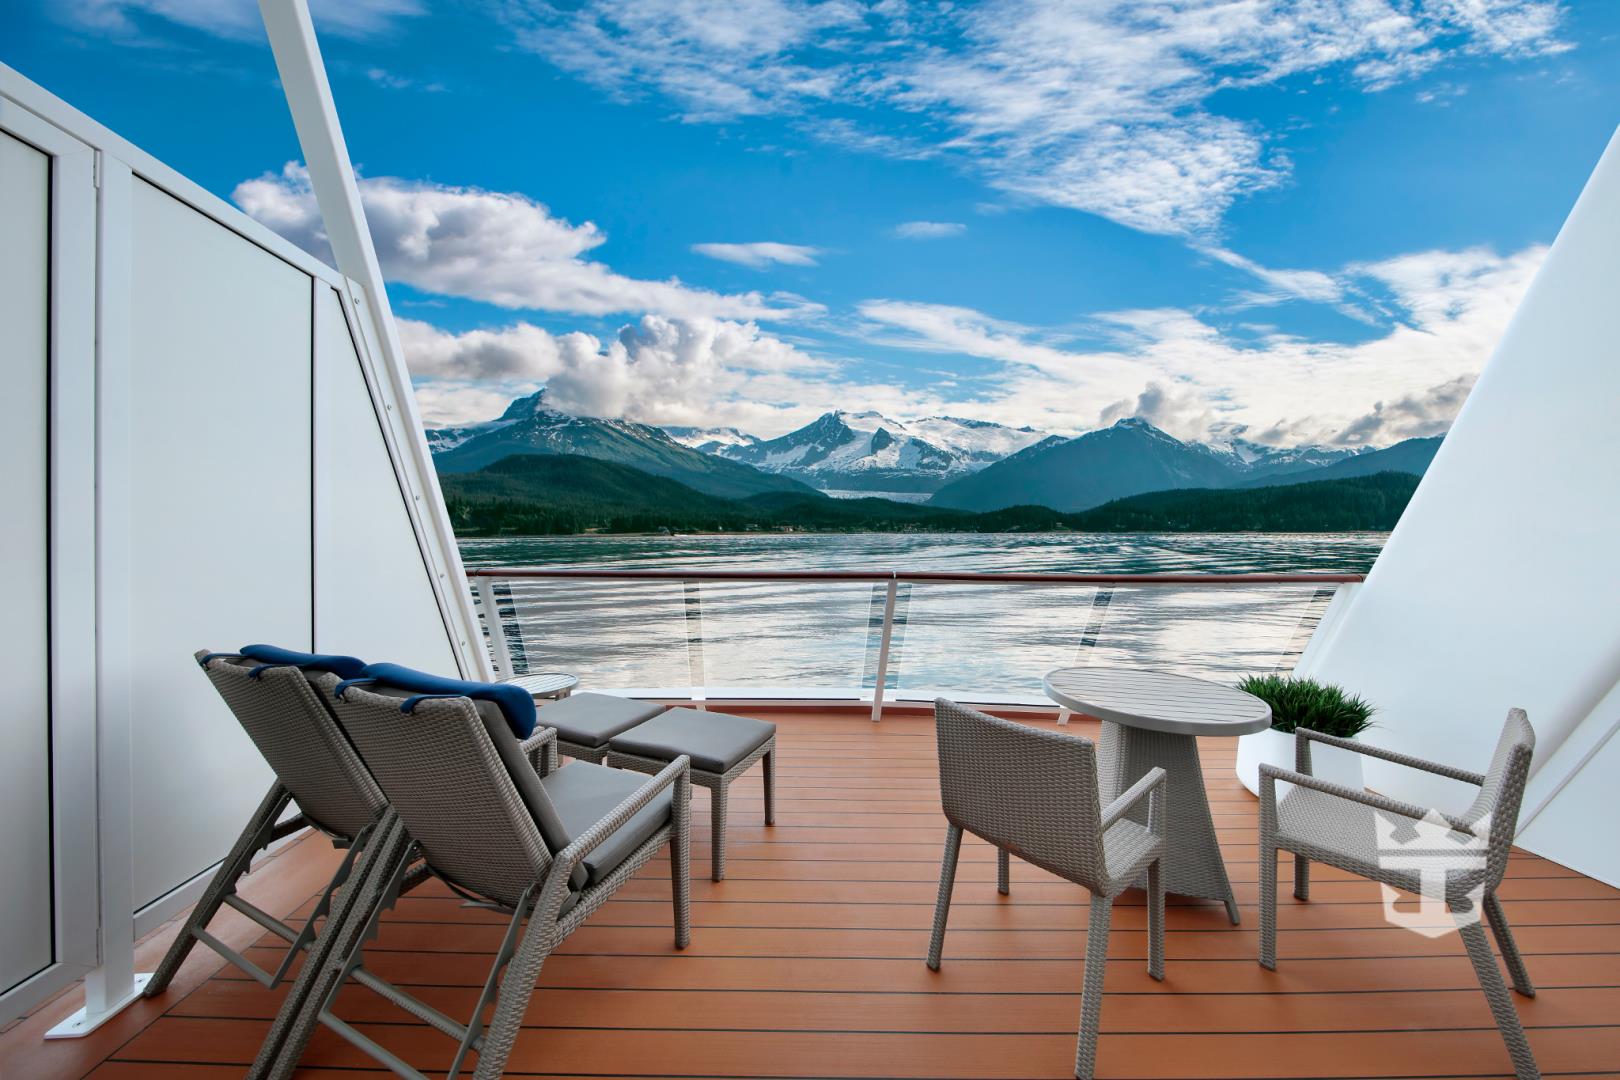 View of the Alaskan mountains and lounge chairs from the balcony of a Grand Loft Suite